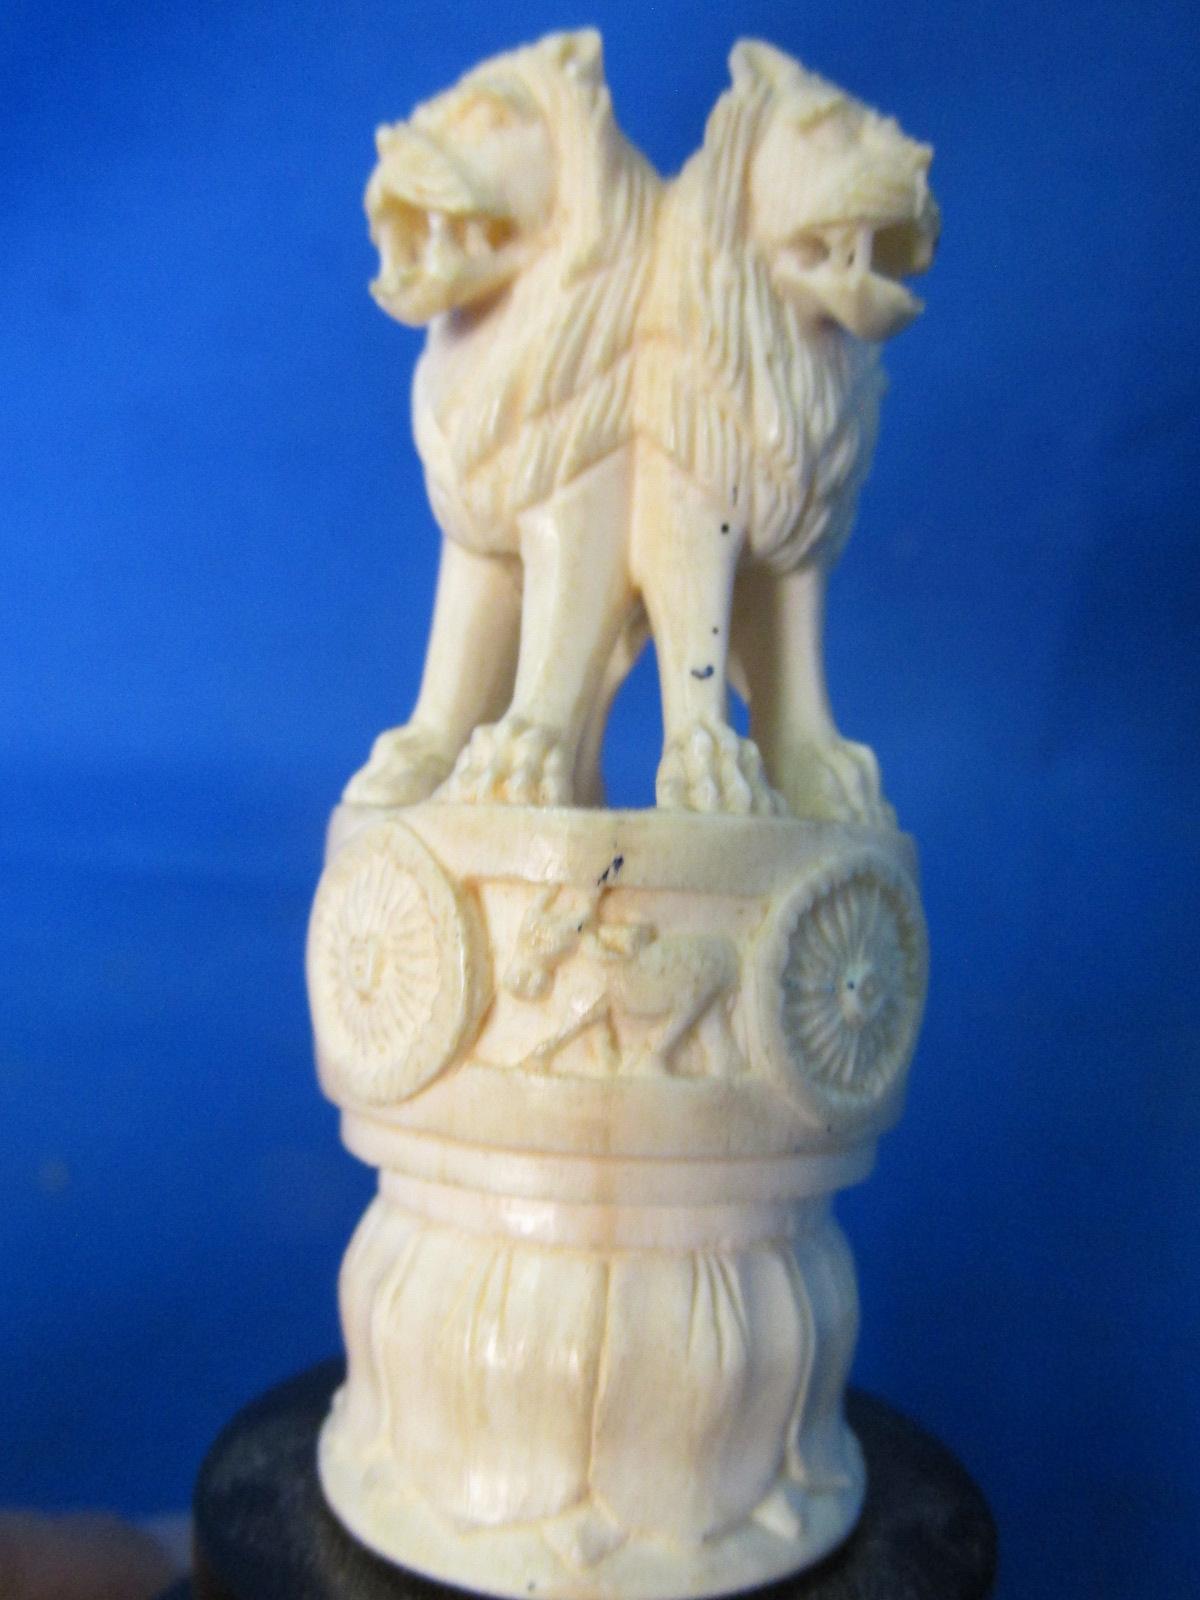 Oriental Art: Lion Capital of Ashkola Appx 4” Tall – Carved Figure 2 1/2” T on 3 tiered stand